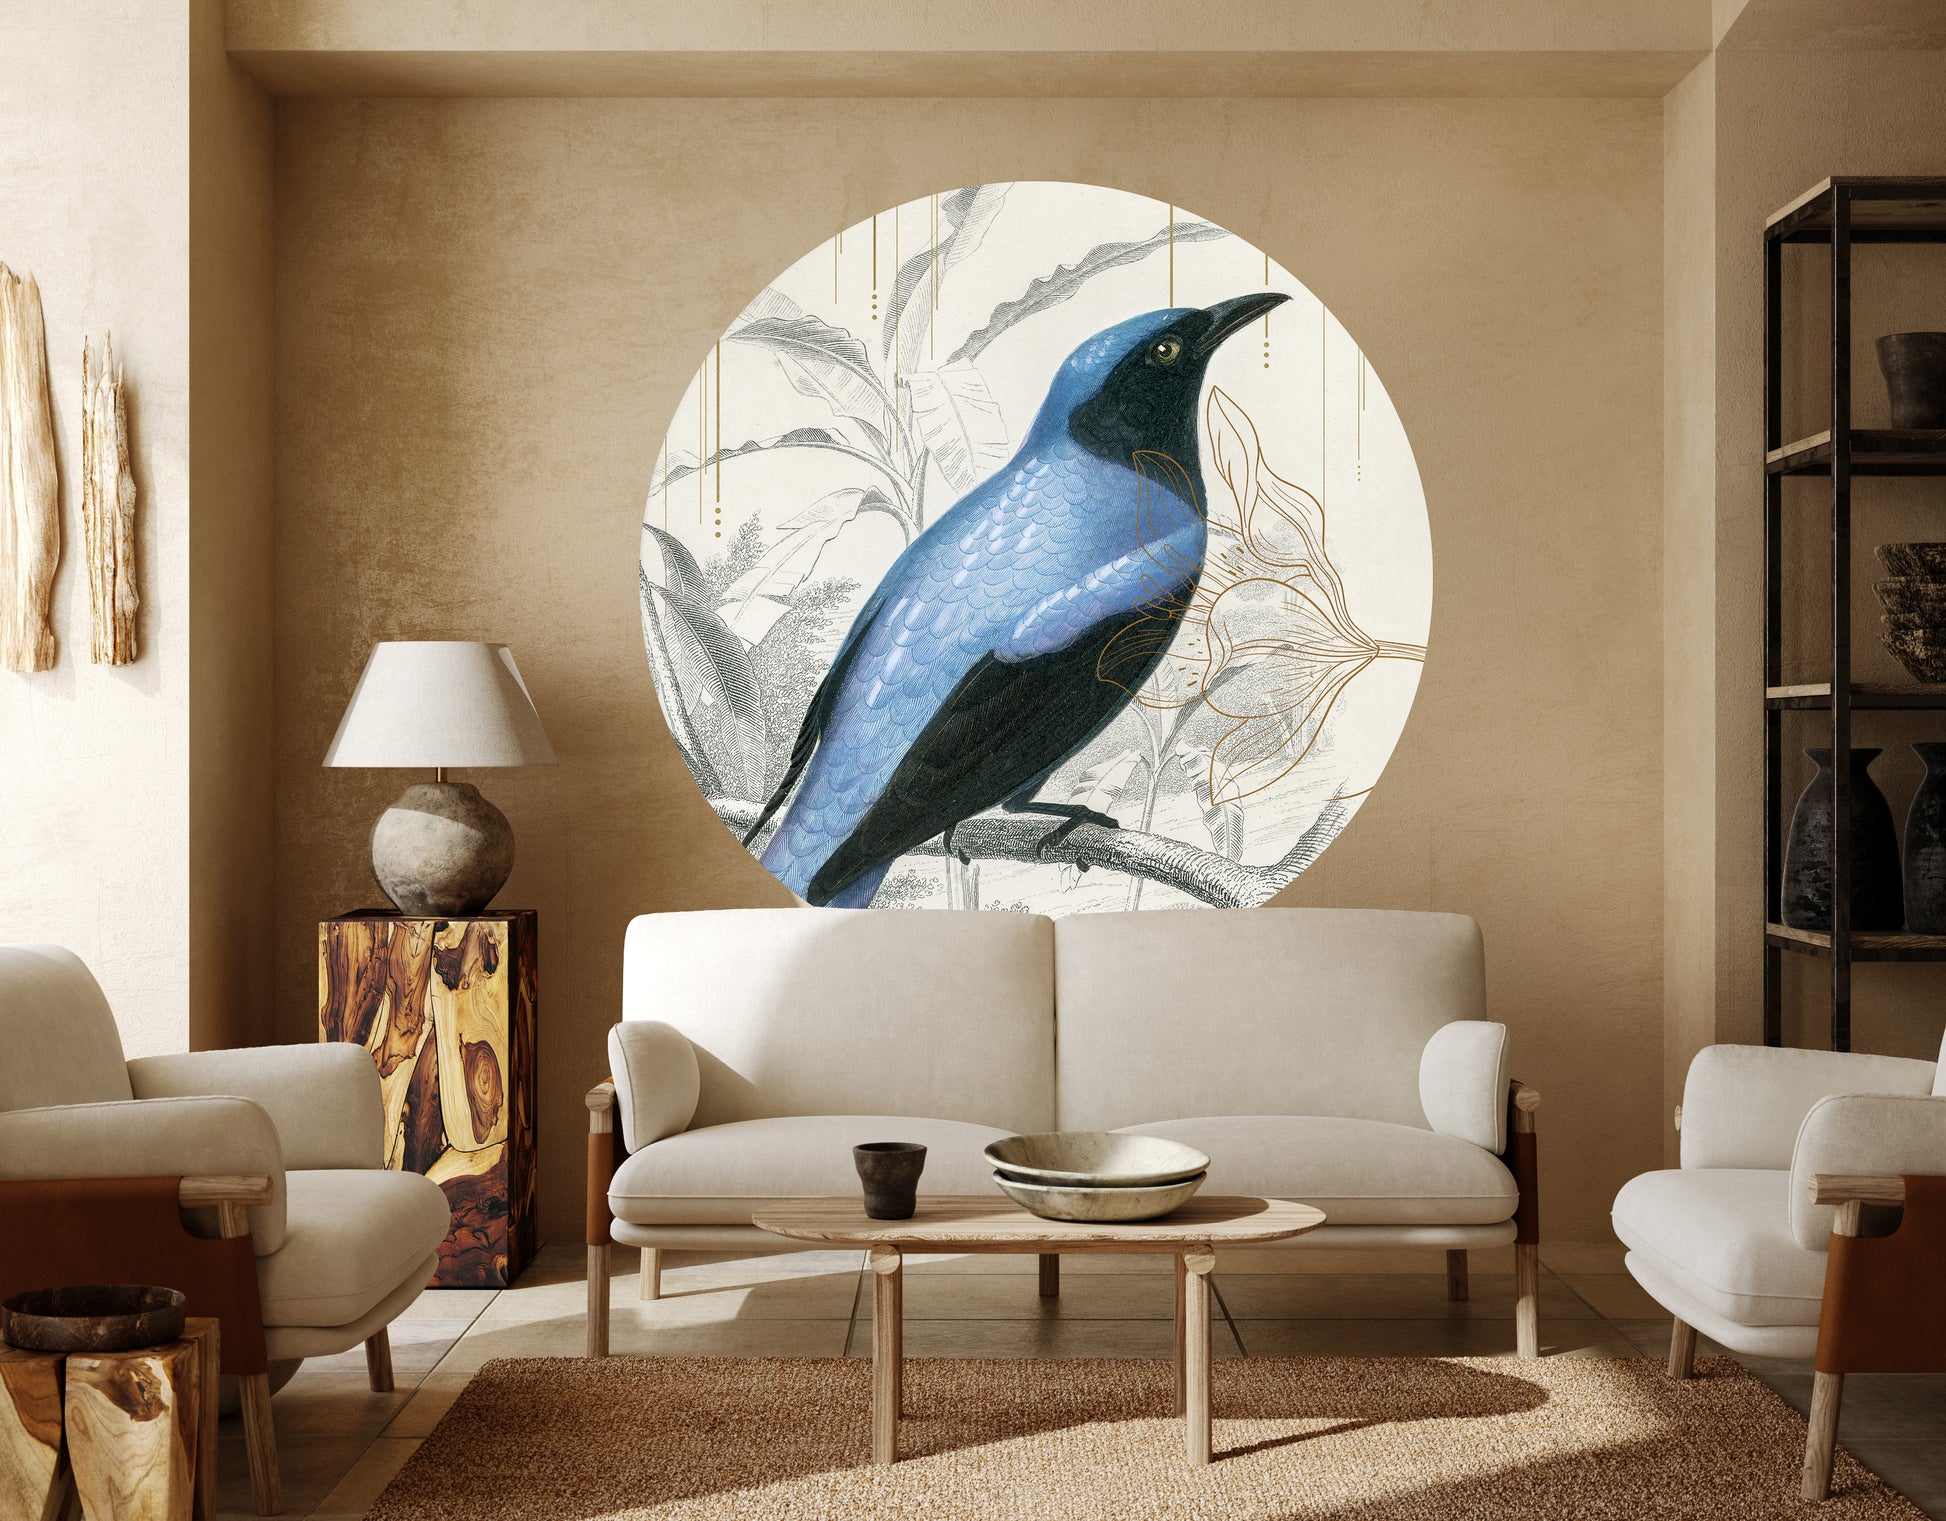 Blue bird wallpaper on the wall of a cozy room